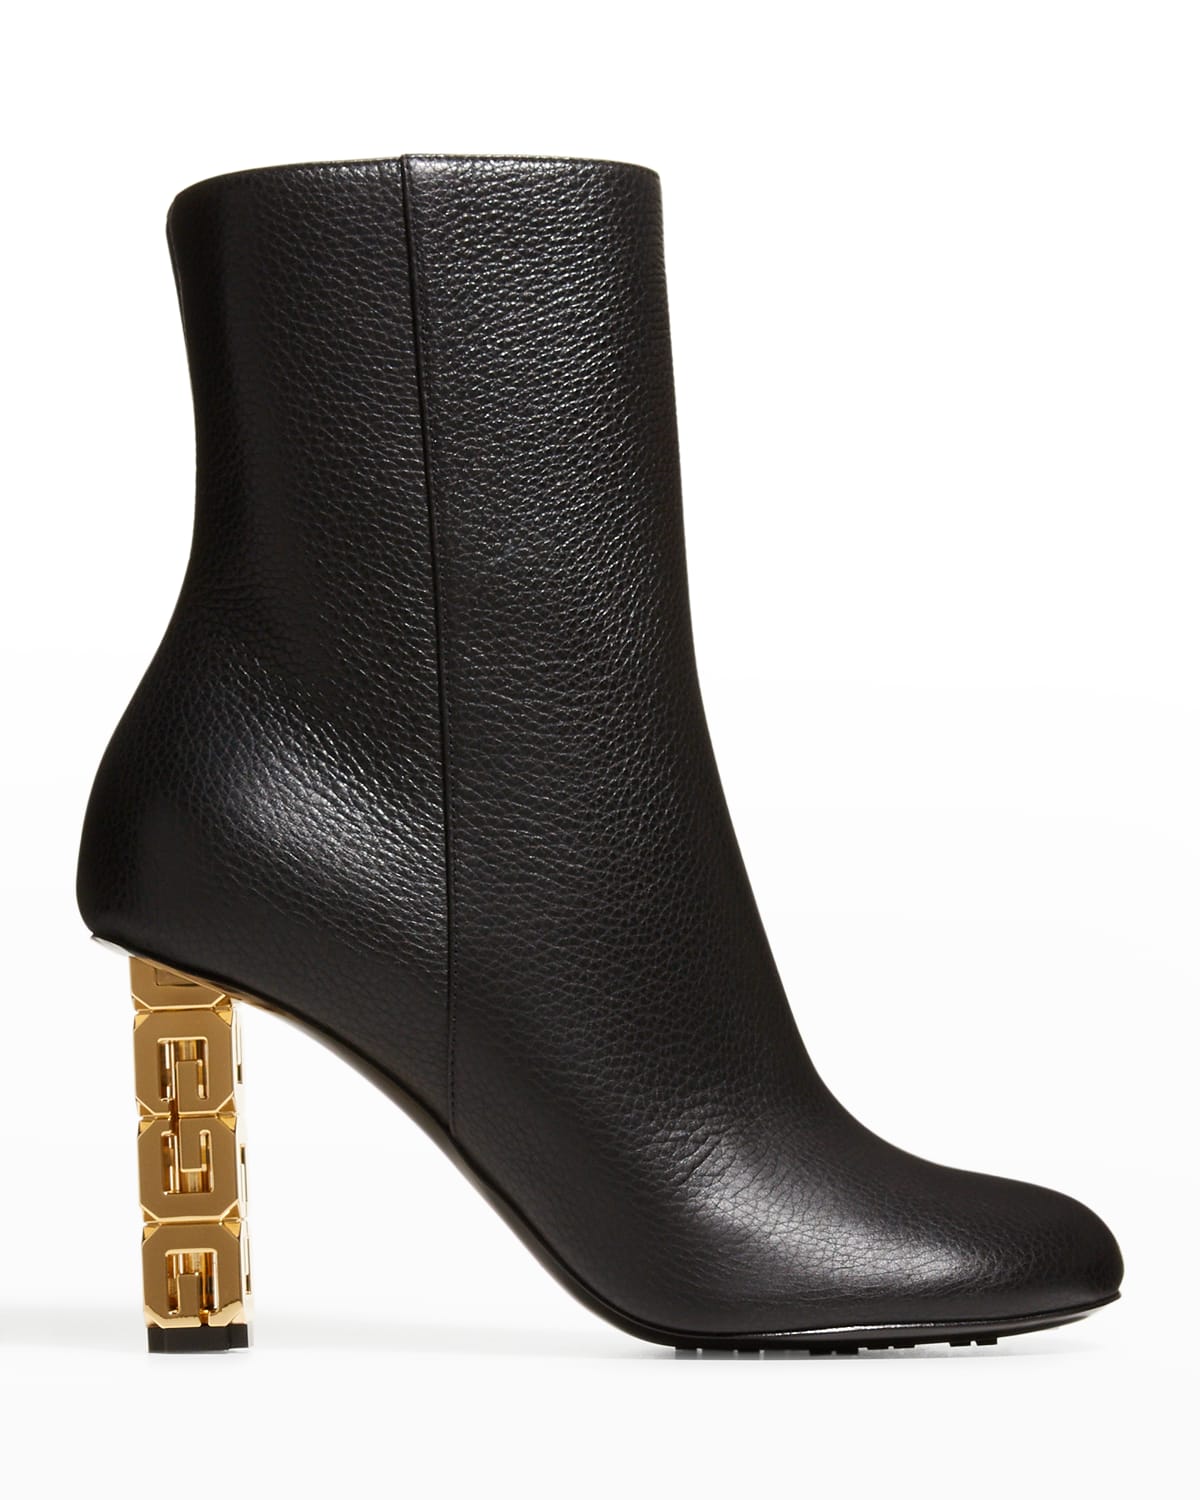 Givenchy Leather Ankle Boots | Neiman Marcus